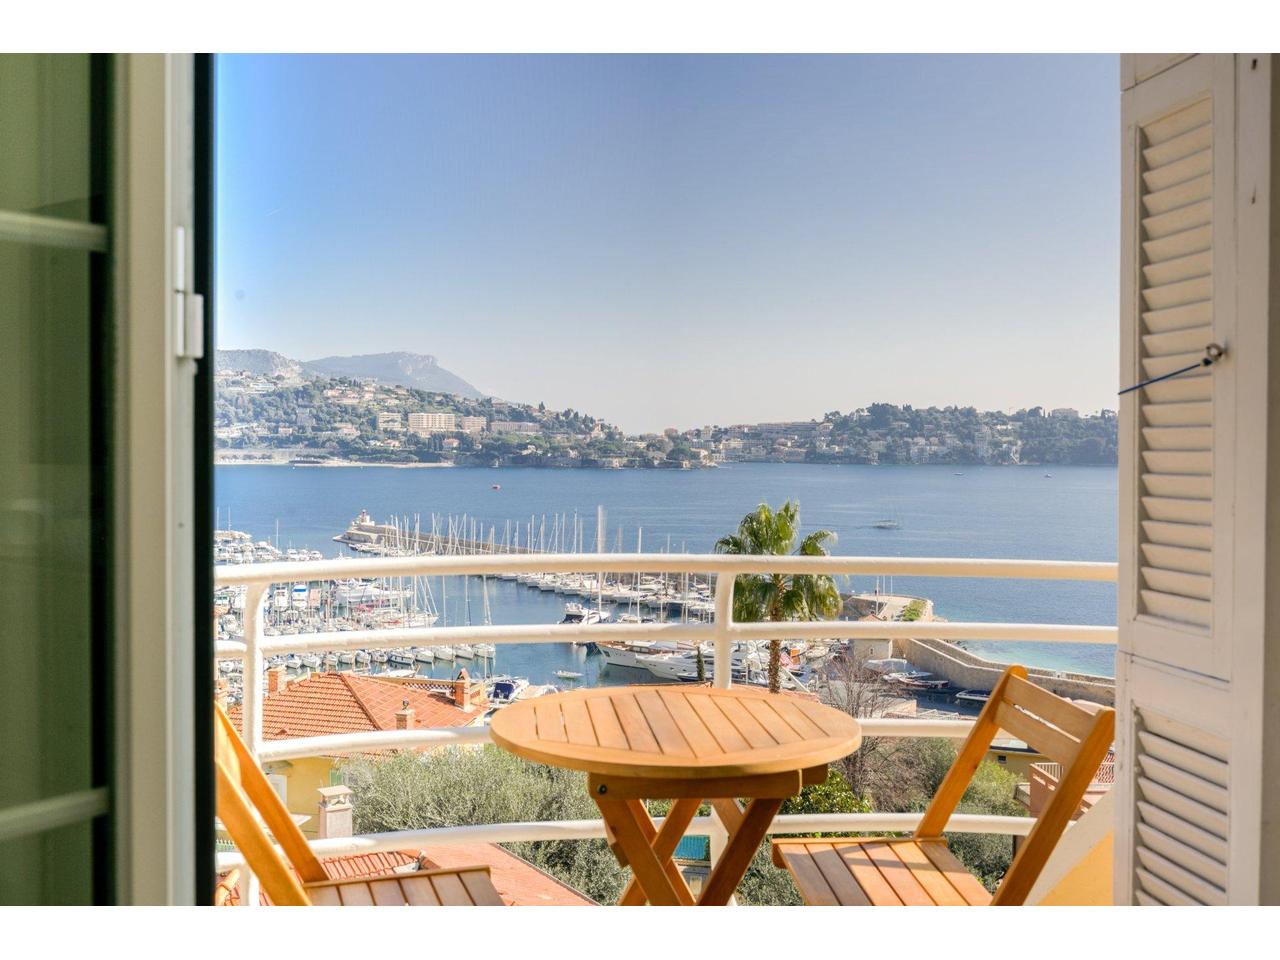 Nice Riviera - Agence Immobiliére Nice Côte d'Azur | Appartement  2 Rooms 47.5m2  for sale   483 000 €